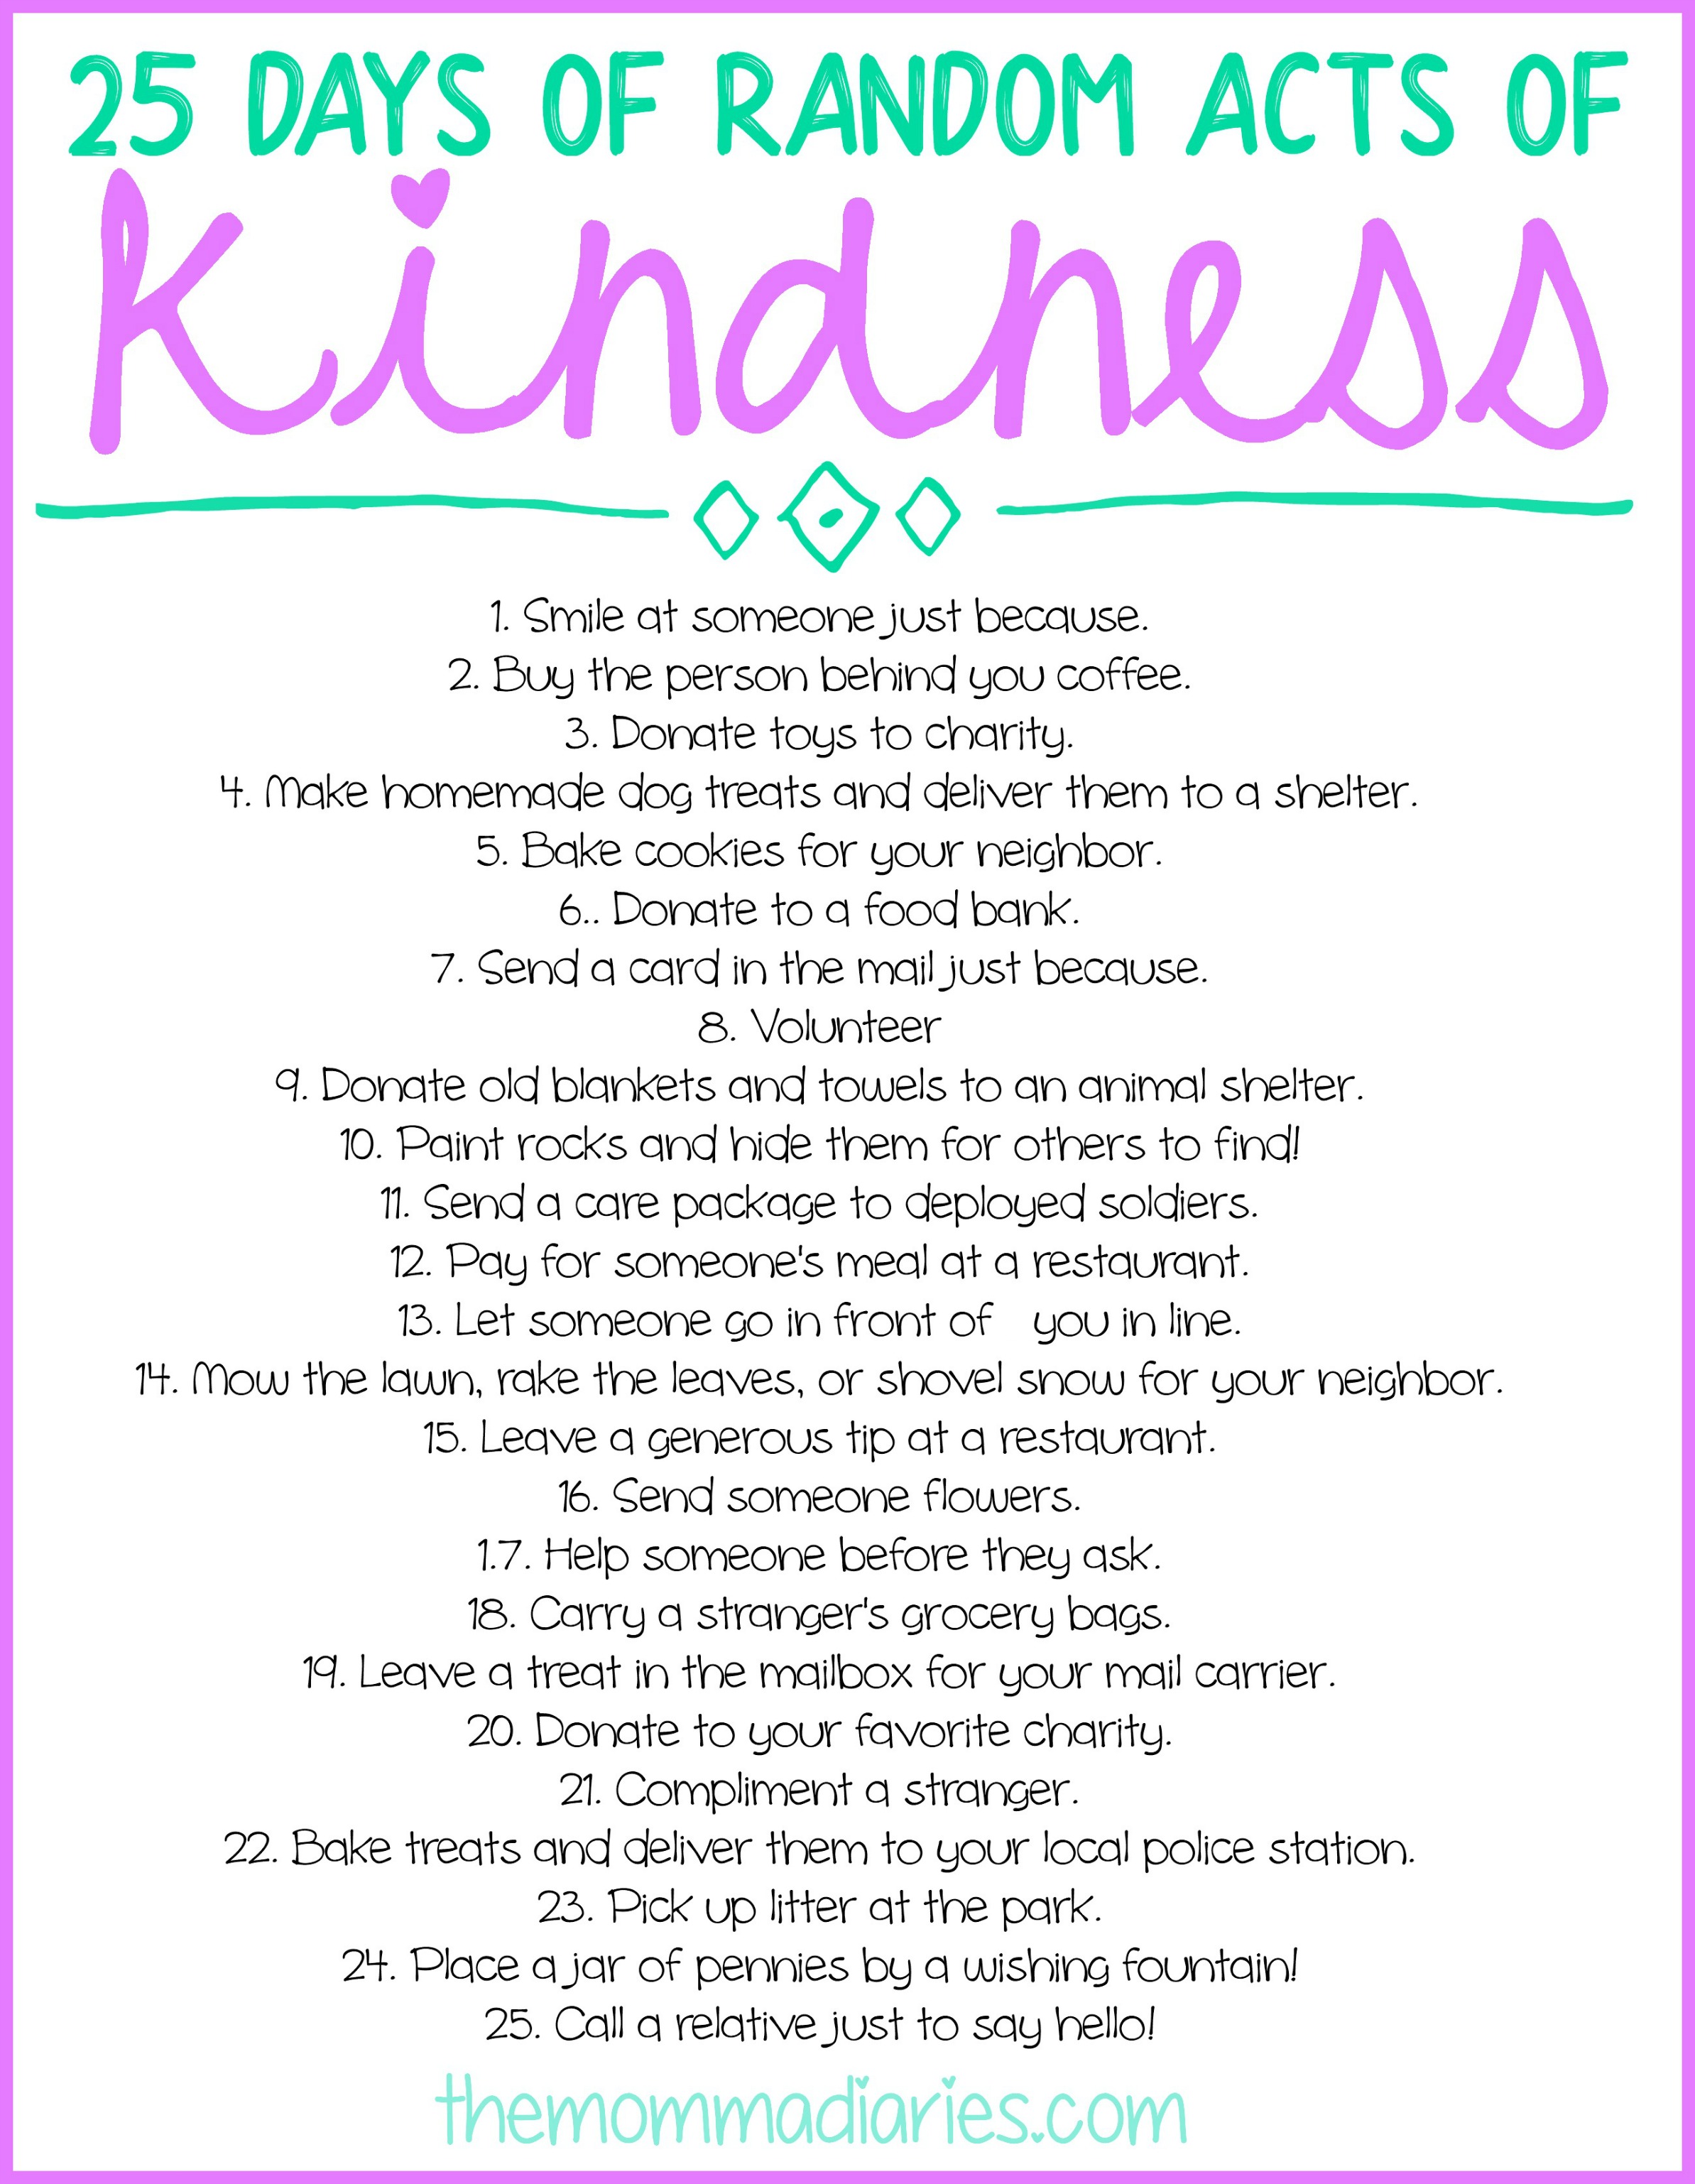 Random Acts of Kindness - Alleghenies Unlimited Care Providers